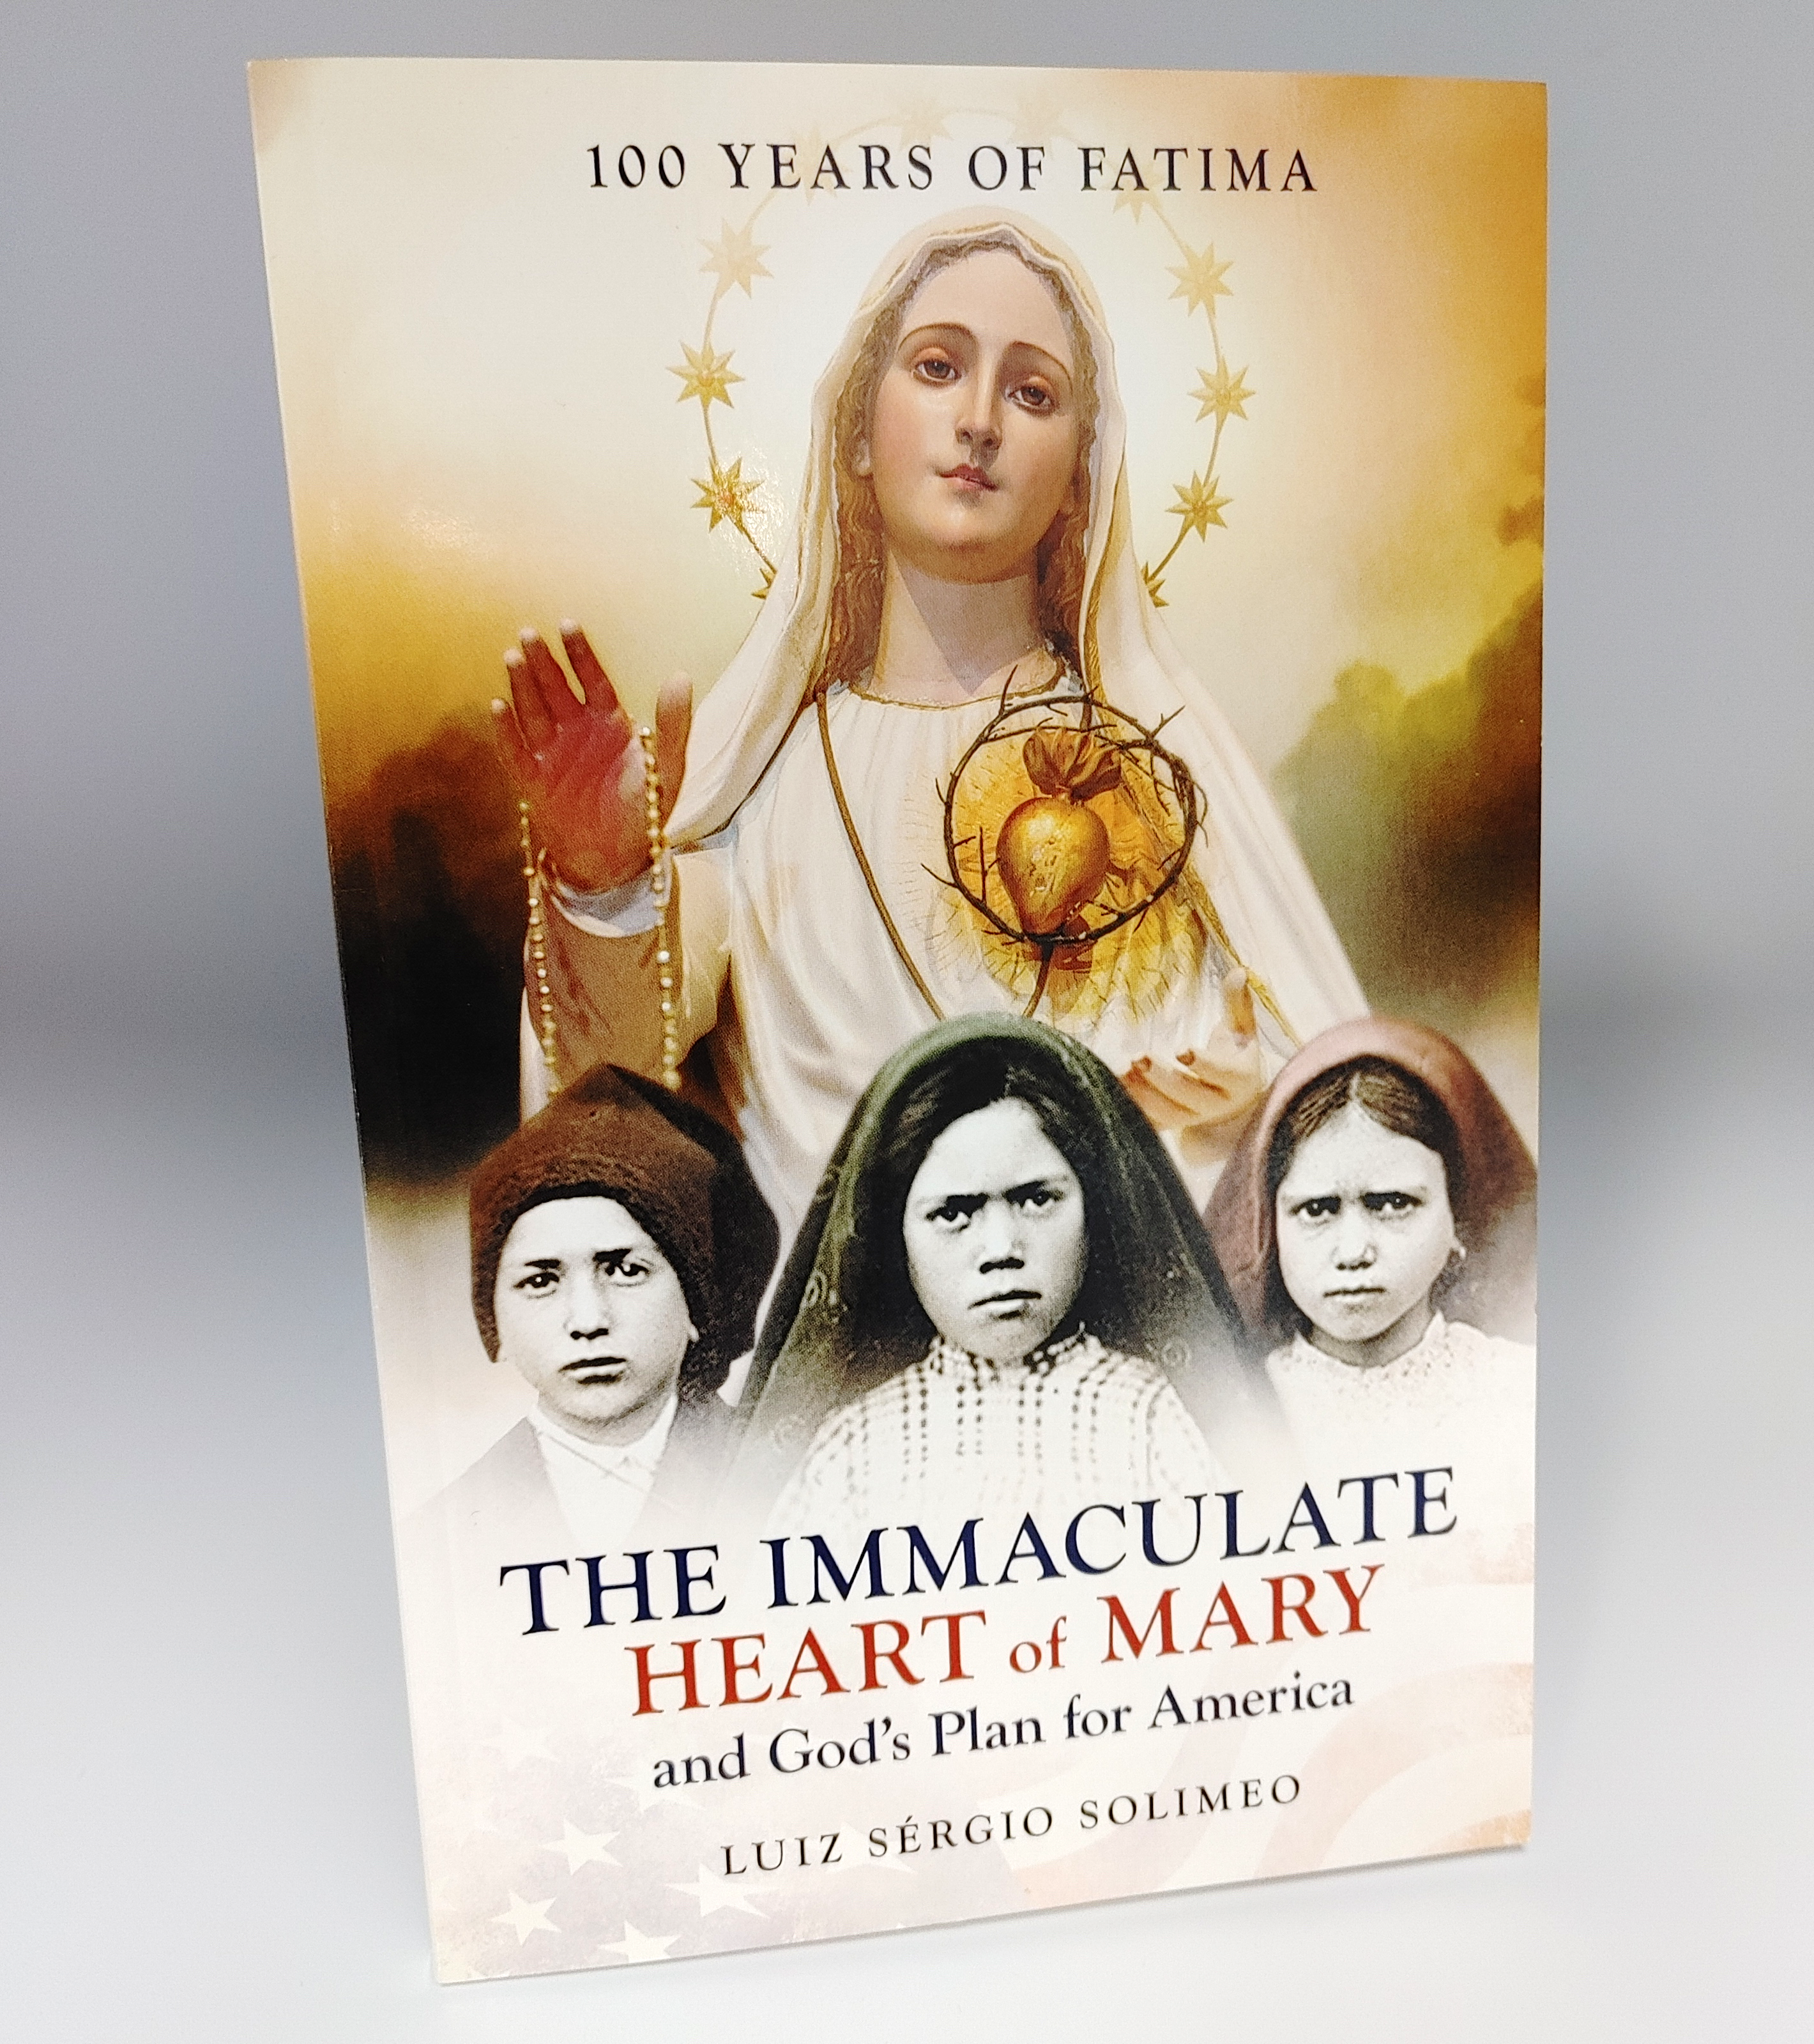 "The Immaculate Heart of Mary"